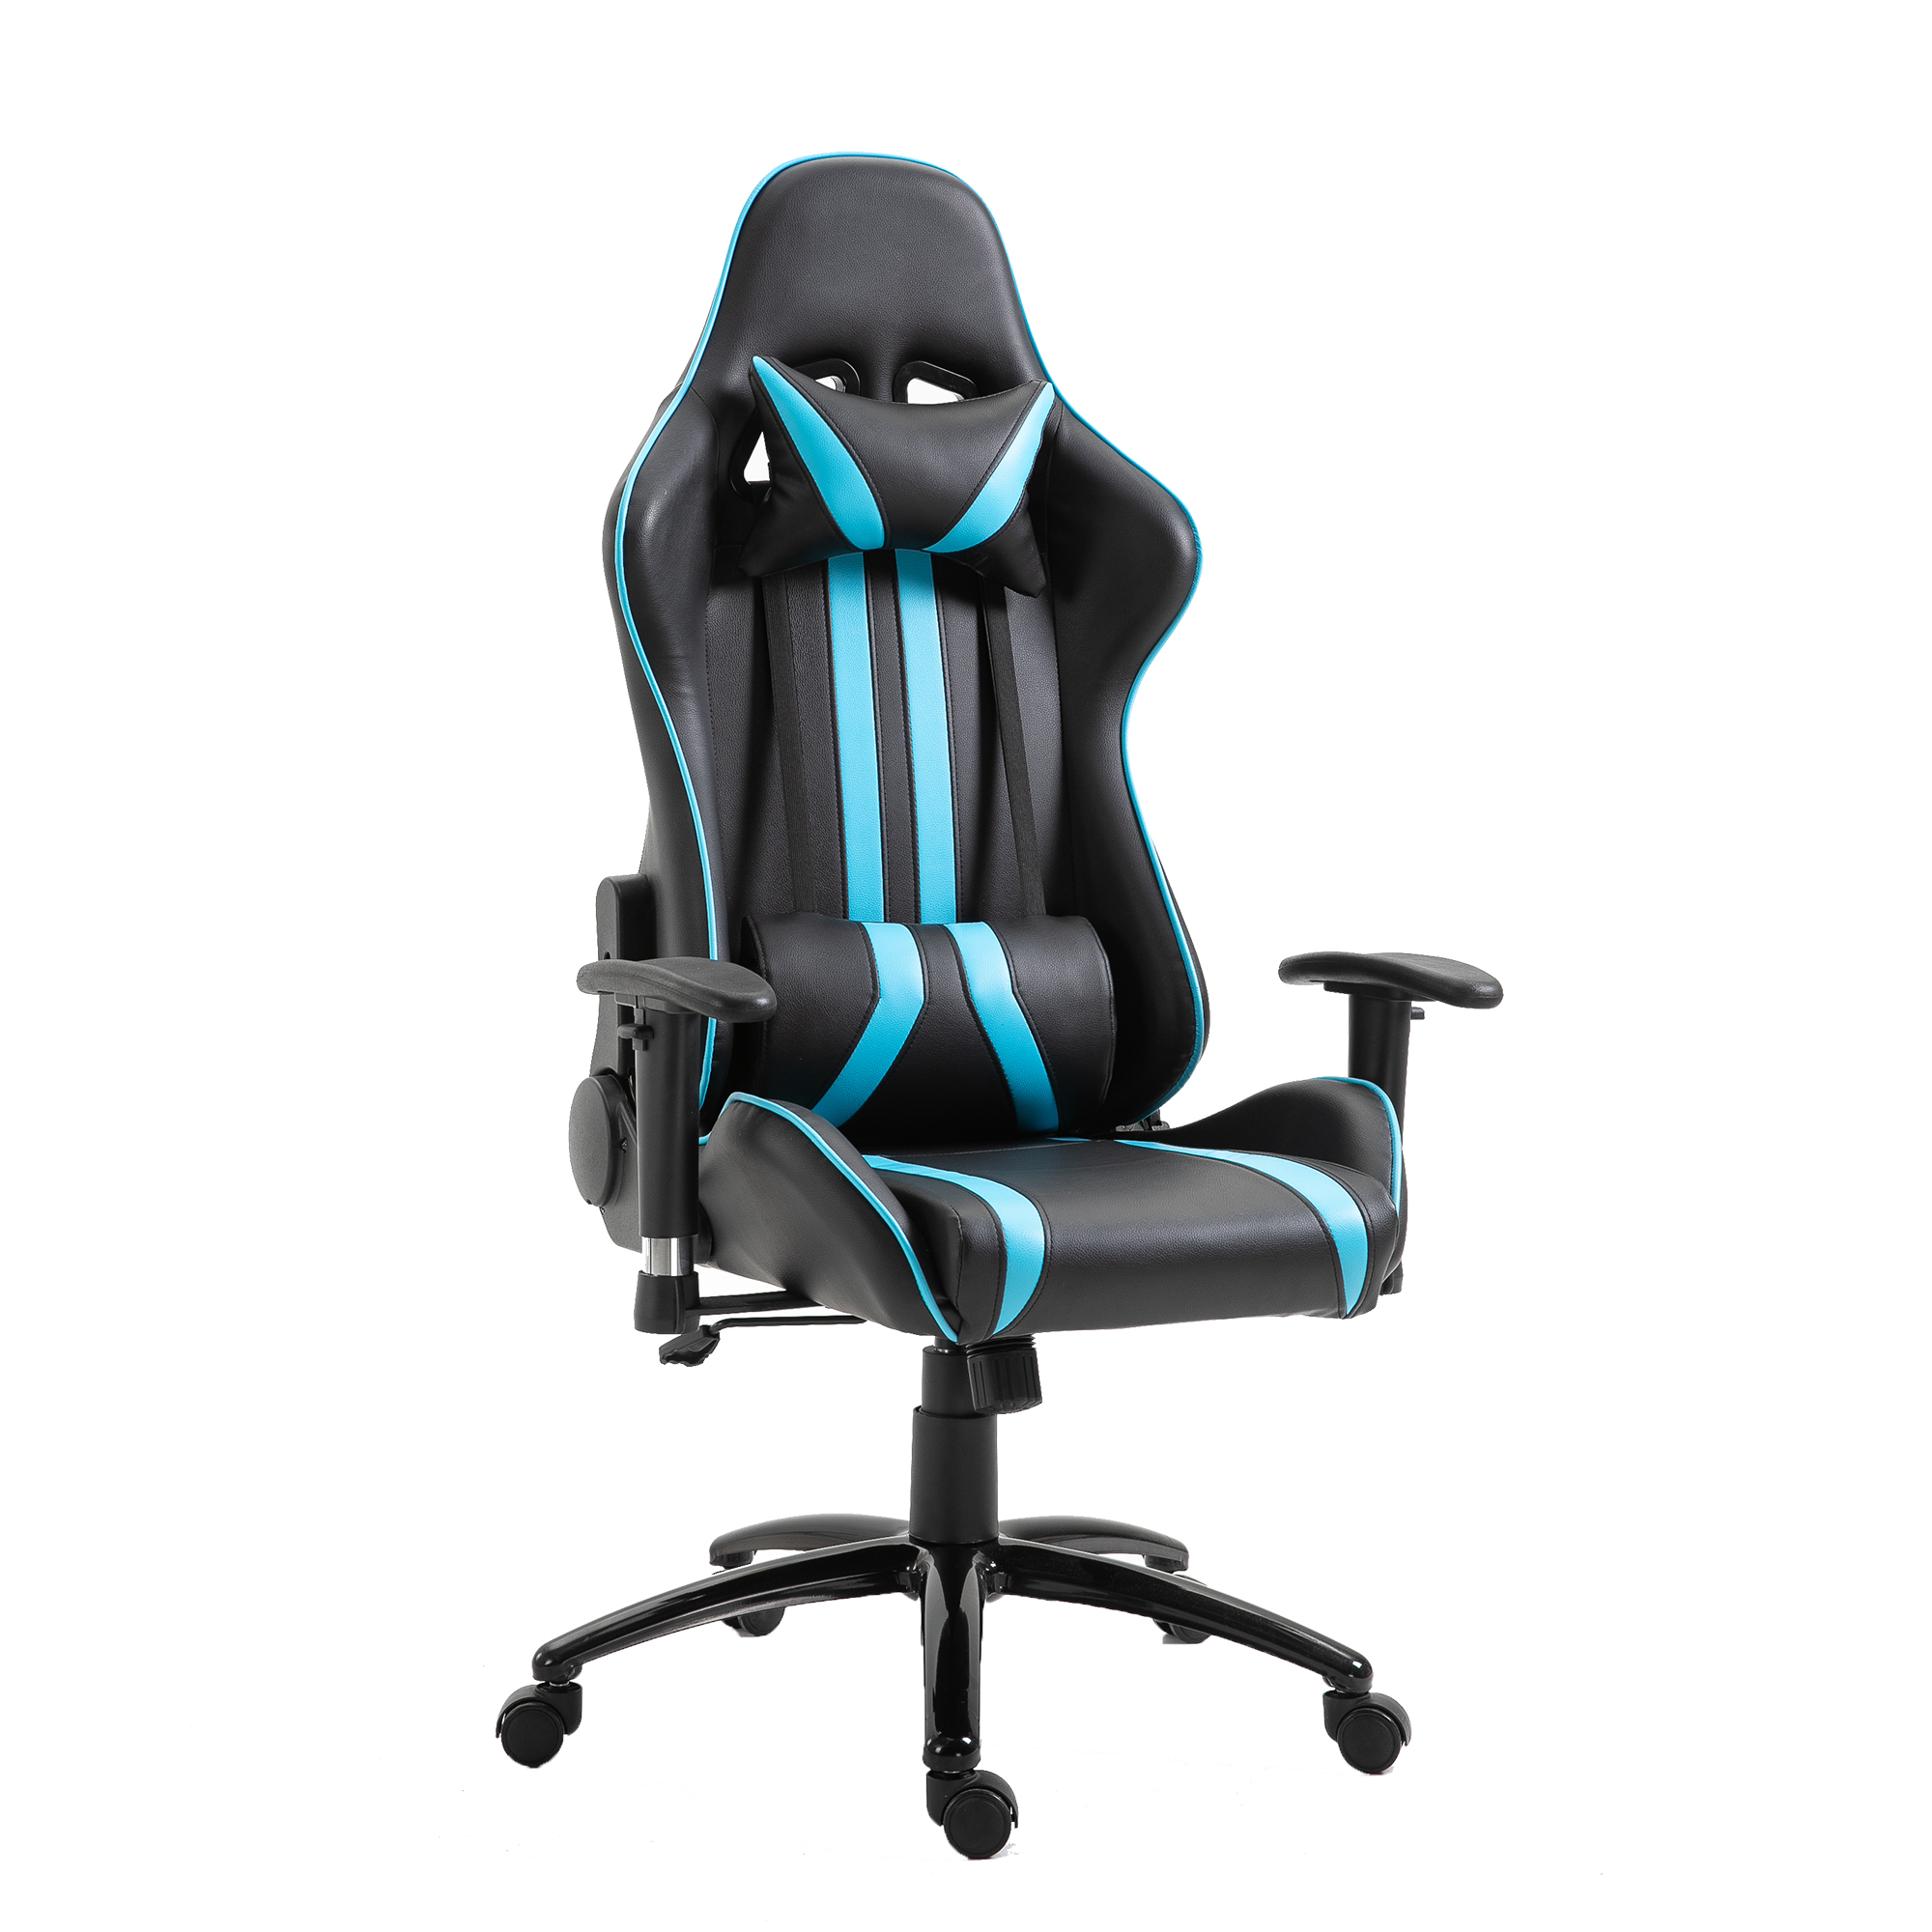 office computer chair gaming chair racing chair for gamer office gaming cahir Featured Image